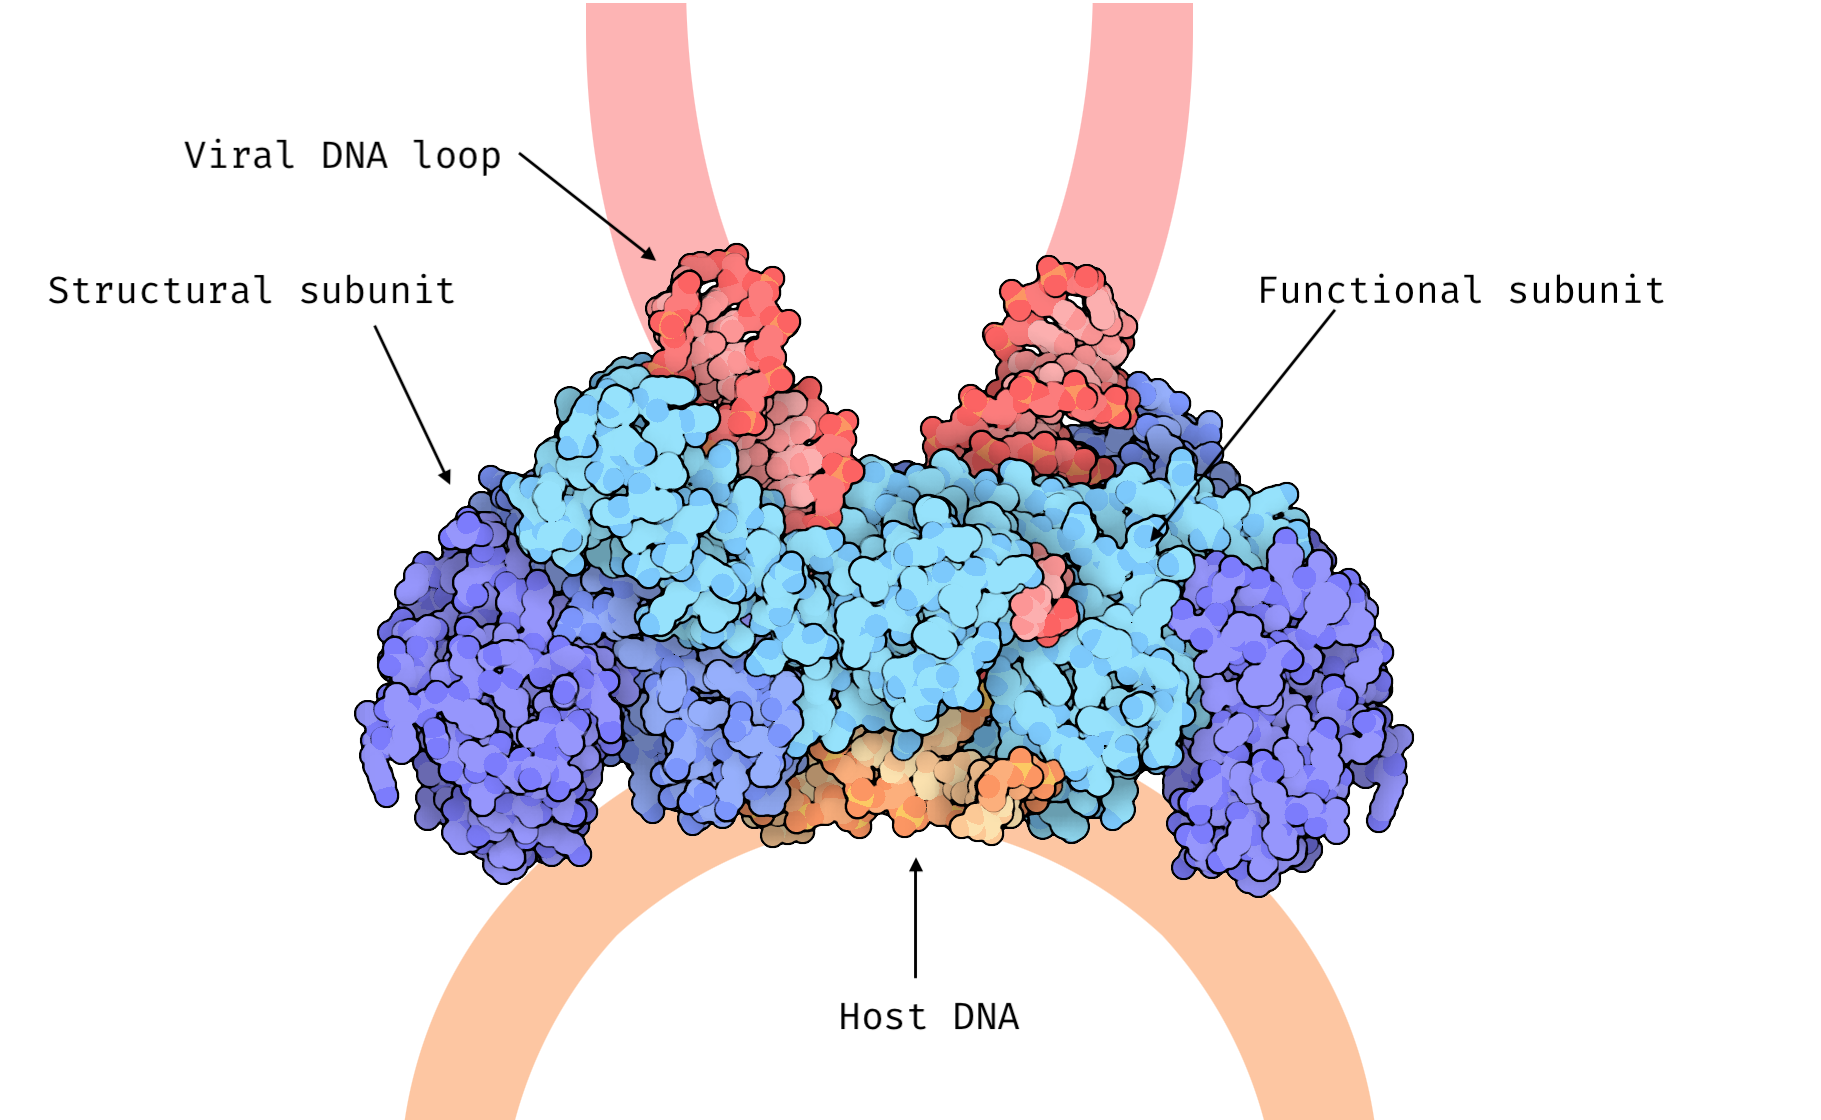 **3D structure of an Integrase.**  
This Integrase tetramer is binded with viral (red) and host (orange) DNA, linked to the two light blue functional subunits via the C-terminal domain. The active site formed by the the catalytic cores of the two functional subunits *(not visible in this representation)*, is where the strand transfer reaction will take place. The two dark blue IN subunits have a structural role. 
This figure was adapted from the PDB 101 molecule of the month Integrase entry by David S. Goodsell and the RCSB PDB ([pdb101.rcsb.org/motm/135](https://pdb101.rcsb.org/motm/135)) with a CC By 4.0 license. 